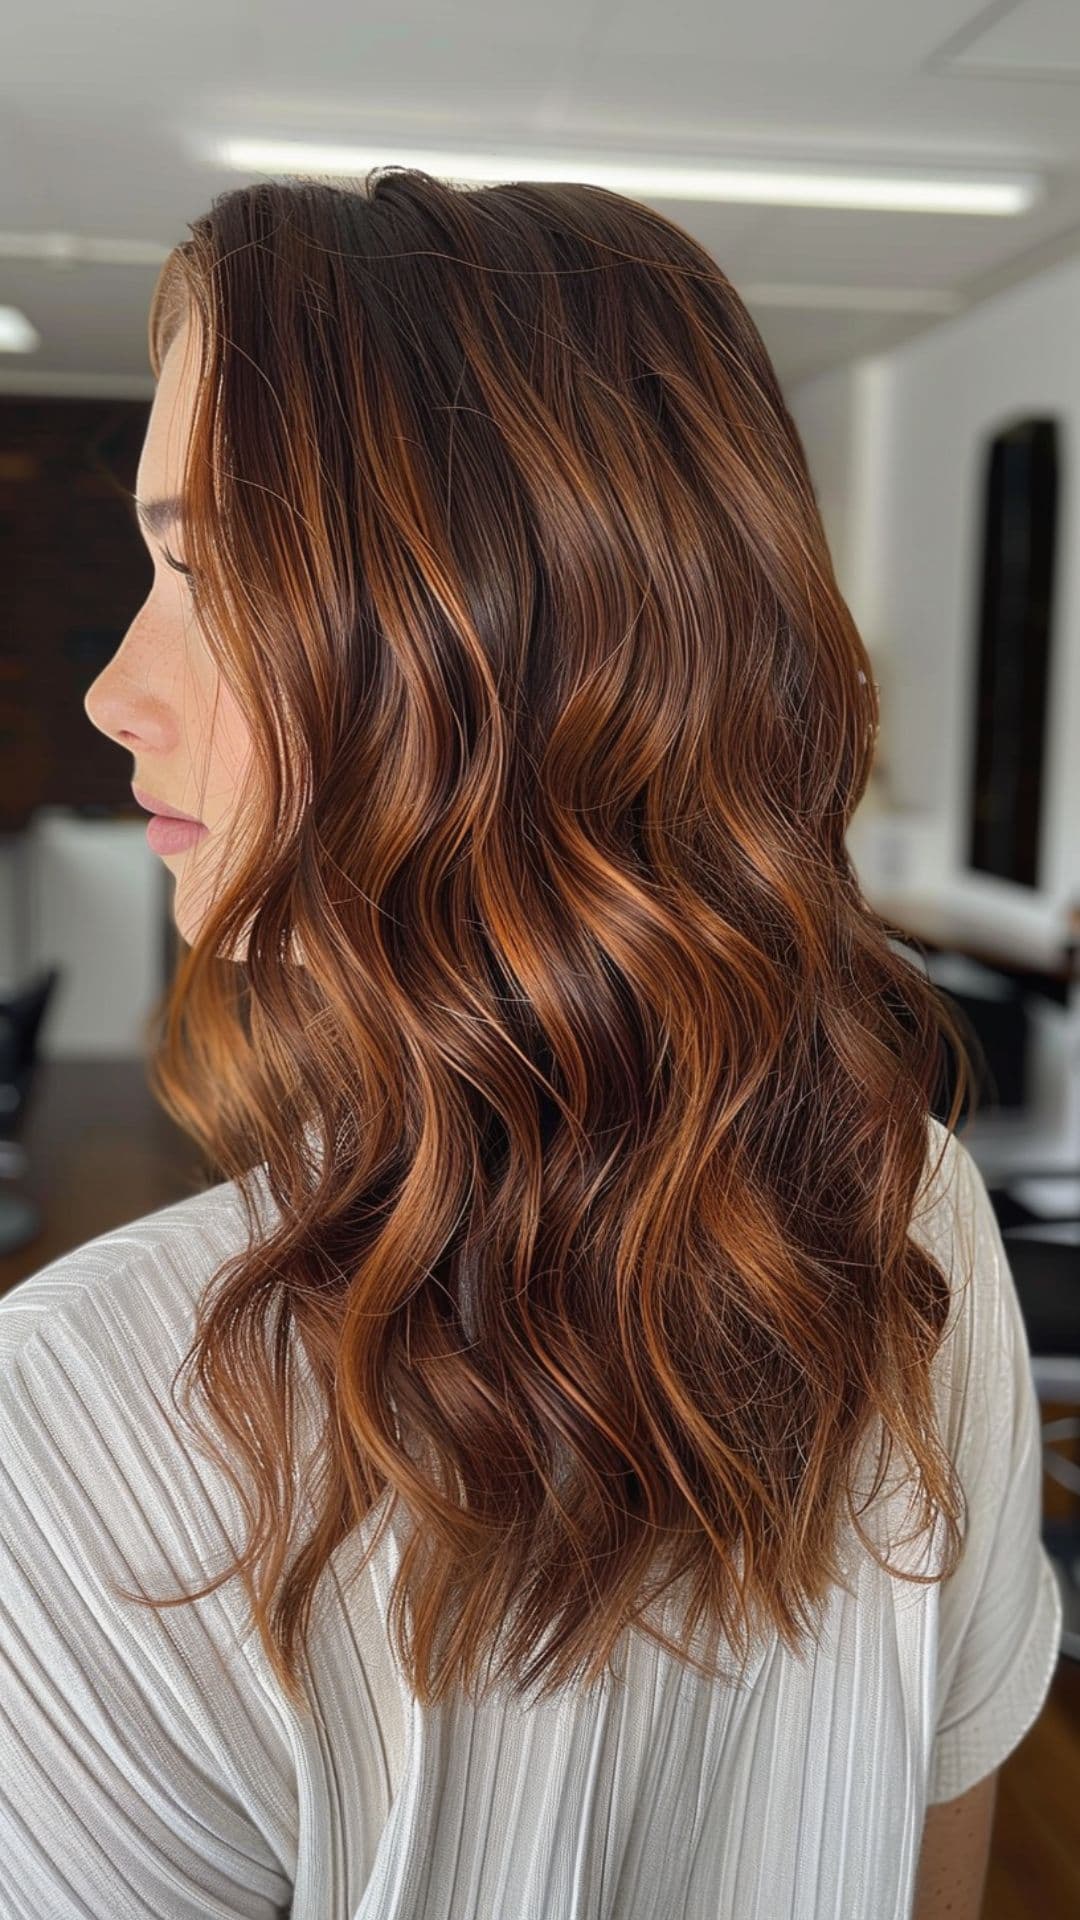 A woman modelling a brown hair with copper balayage hairstyle.